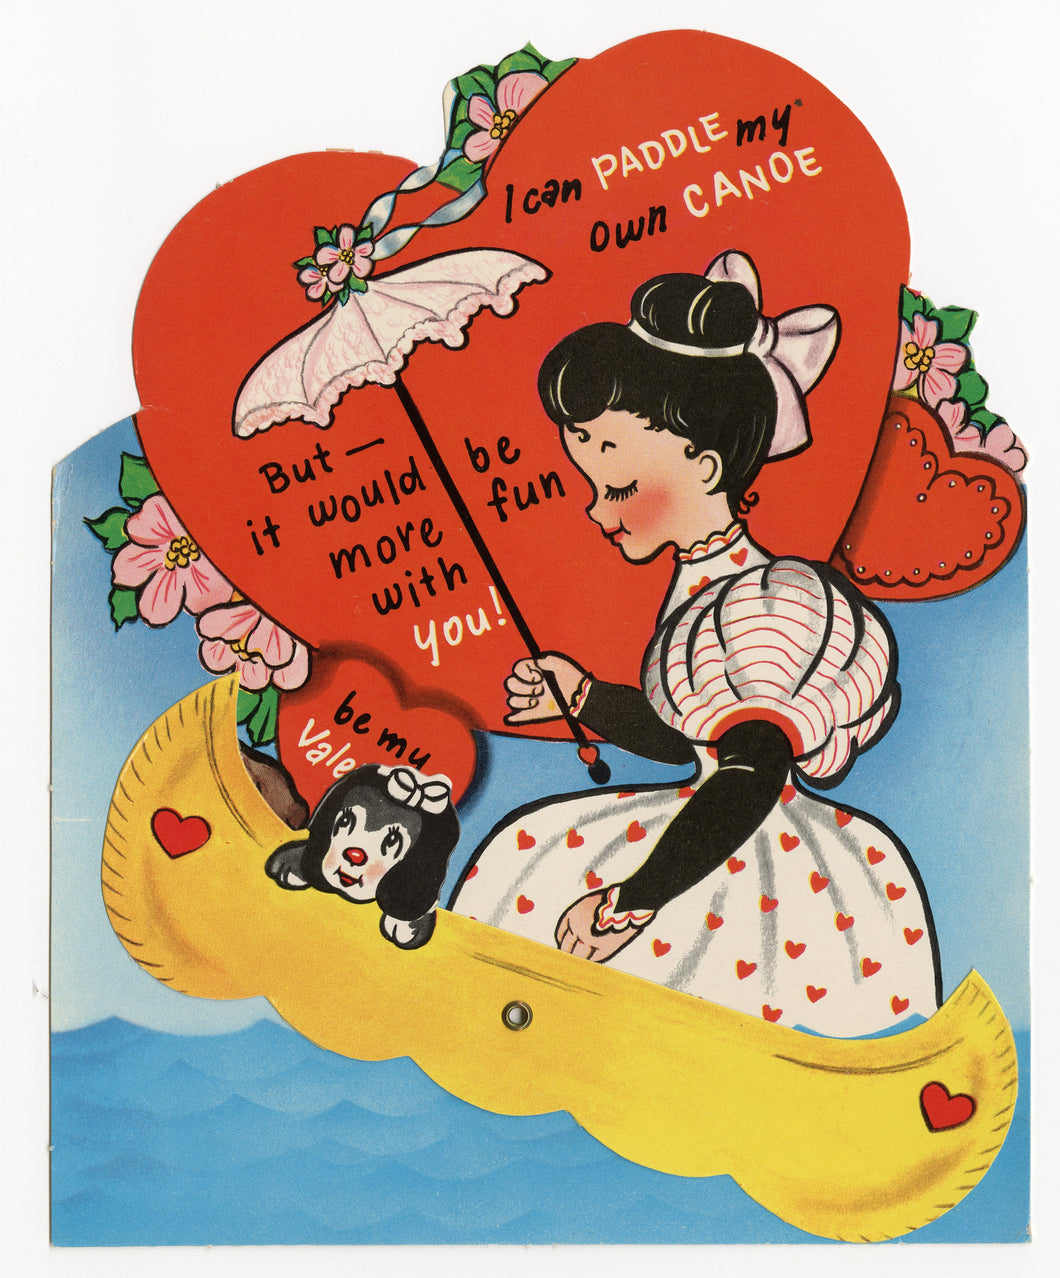 Assorted Unused 1950's VALENTINES with Envelopes || Paddle my Own Canoe